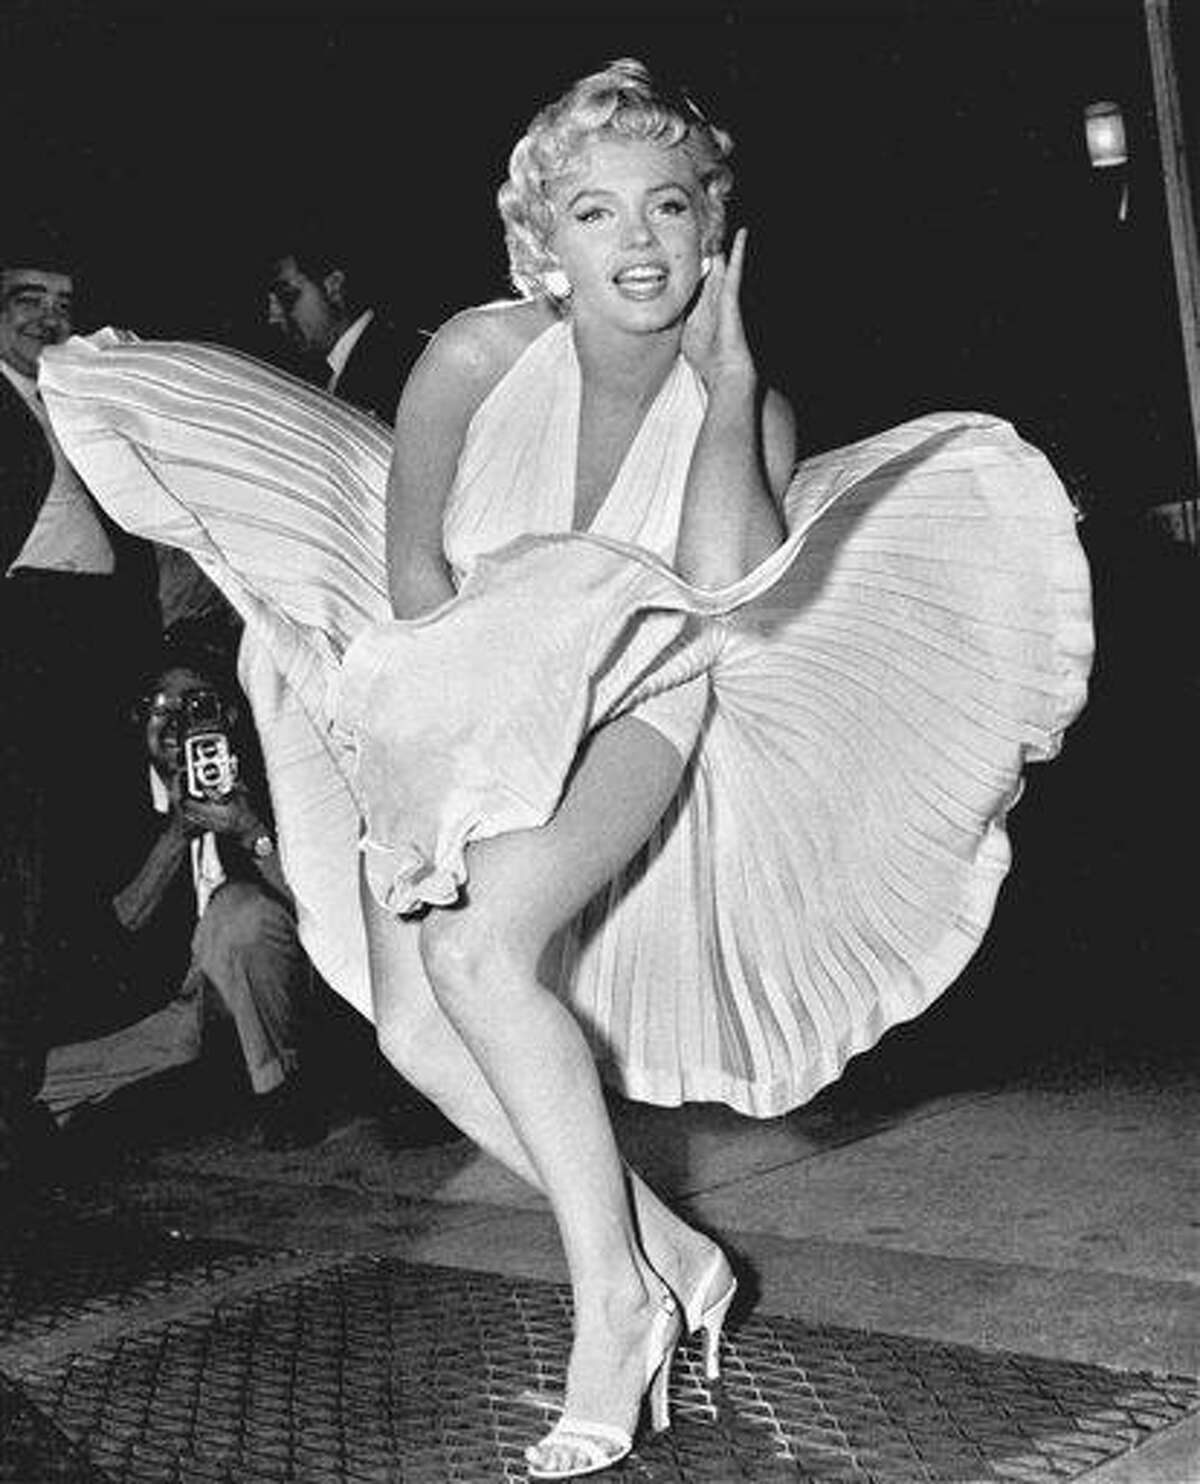 FILE - In this Sept. 9, 1954 file photo, Marilyn Monroe poses over the updraft of New York subway grating while in character for the filming of "The Seven Year Itch" in Manhattan. The former Norma Jean Baker modeled and starred in 28 movies grossing $200 million. Sensual and seductive, but with an air of innocence, Monroe became one of the world's most adored sex symbols. She died alone by suicide, at age 36 in her Hollywood bungalow. (AP Photo/Matty Zimmerman, File)